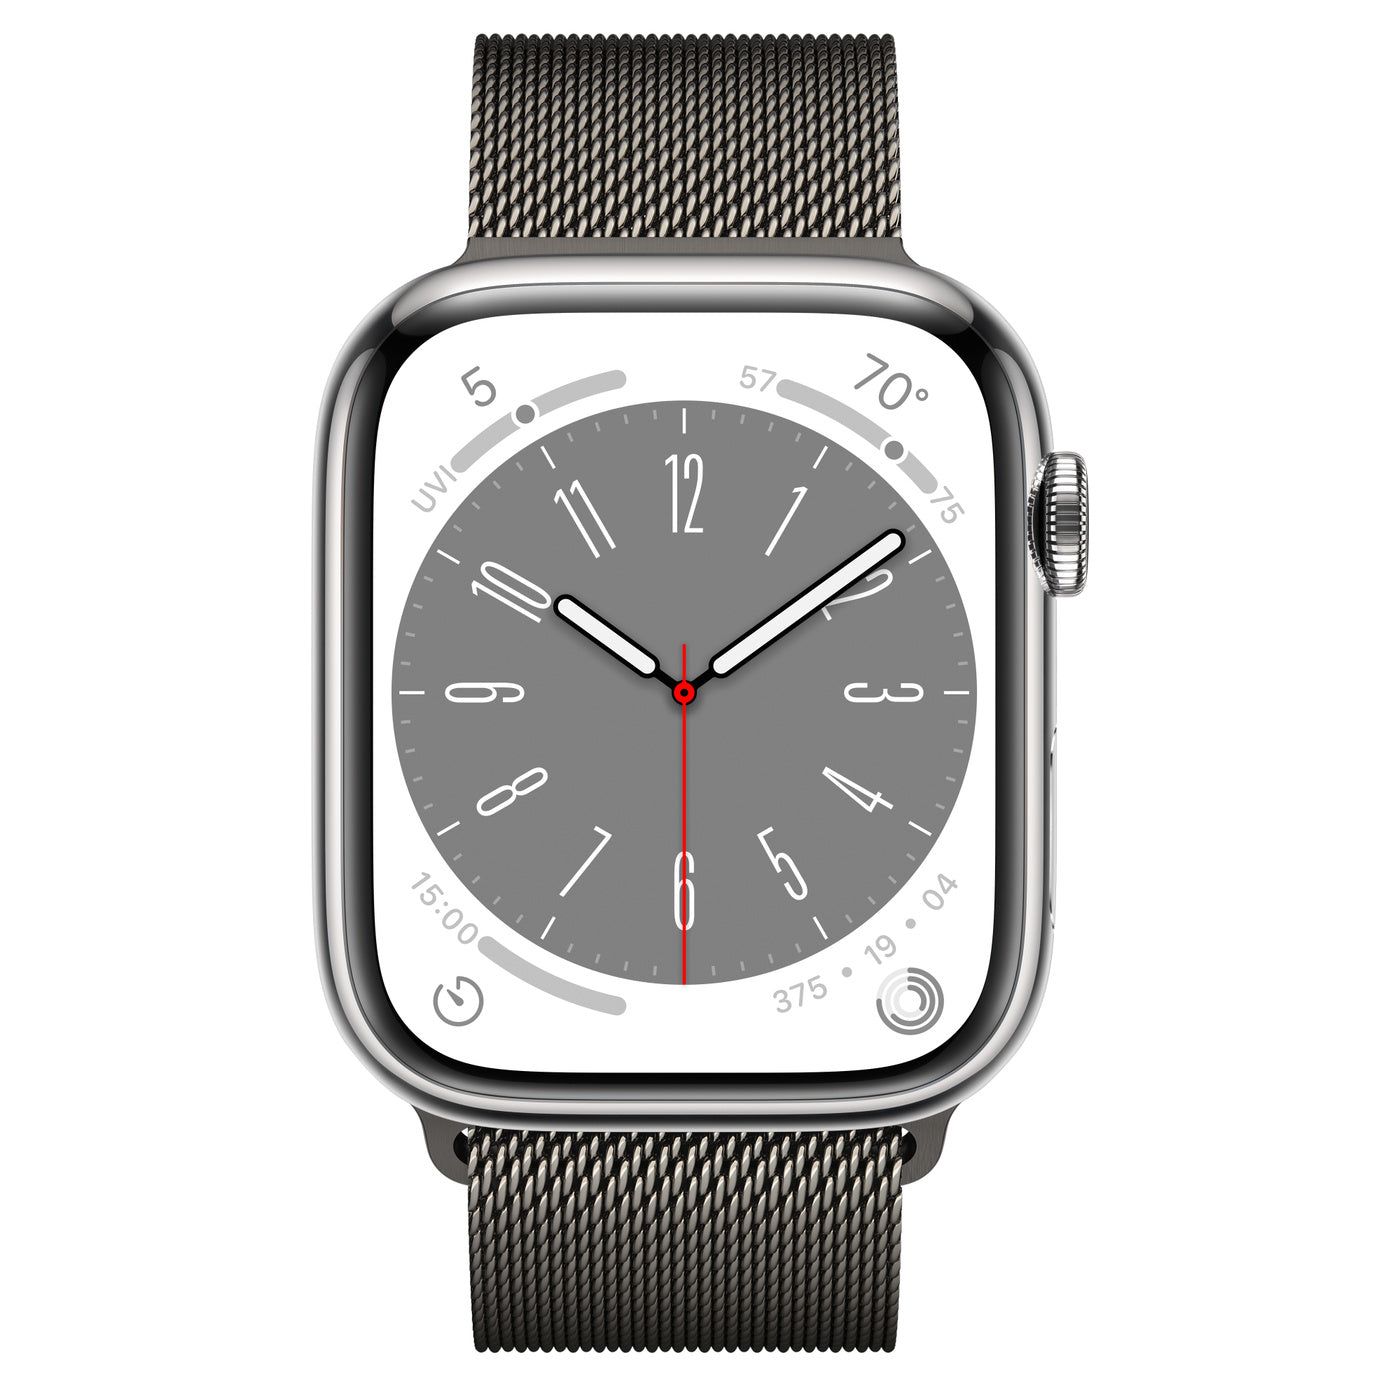 Stainless Steel Case with Milanese Loop